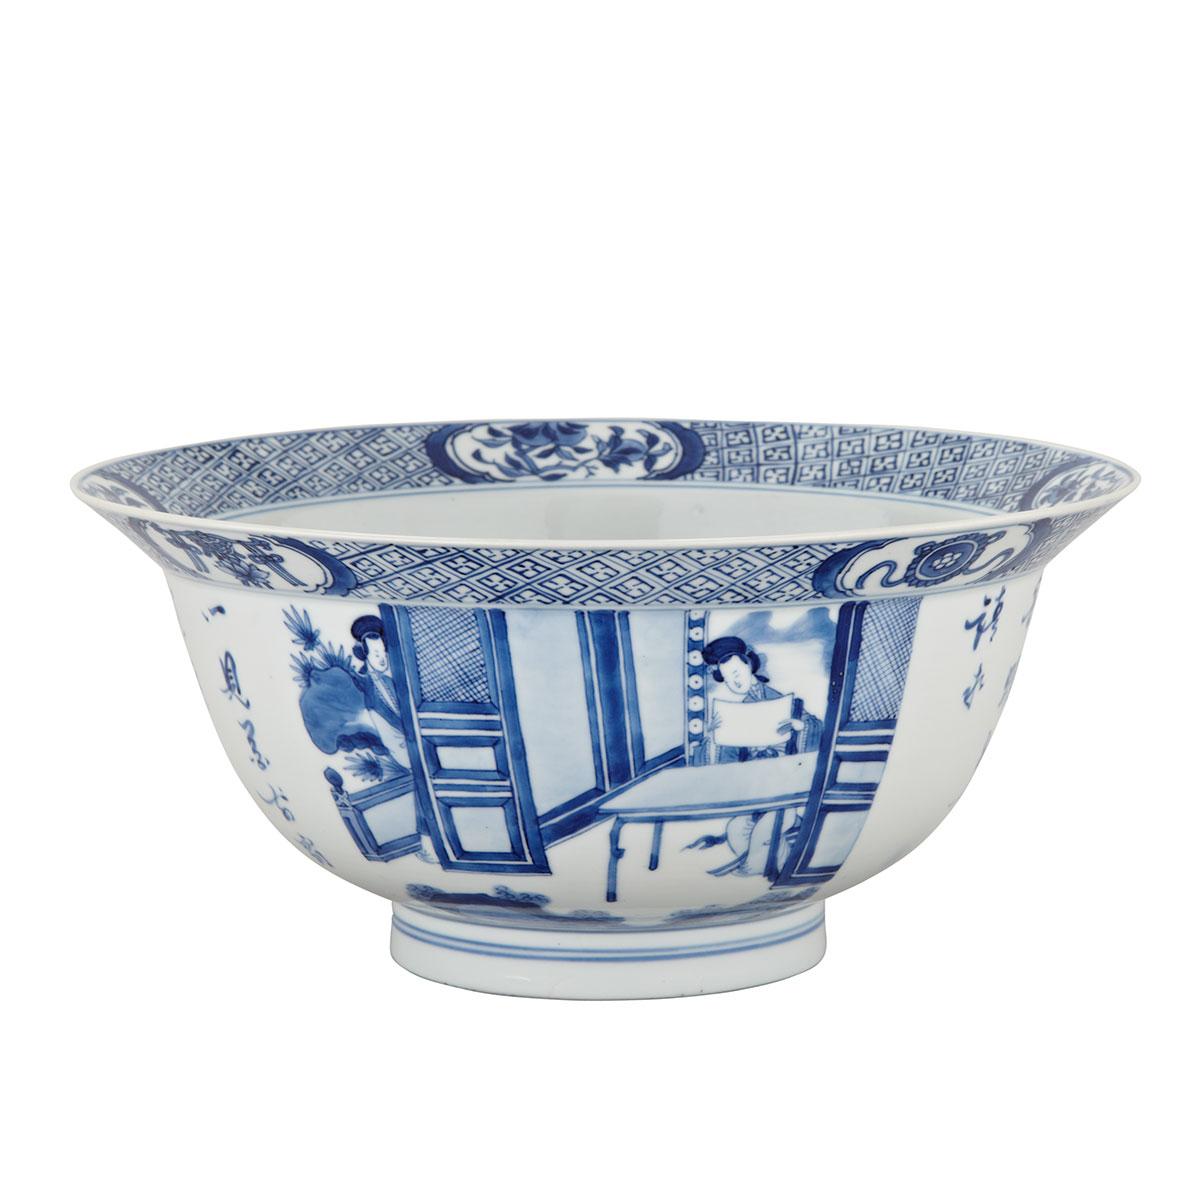 Blue and White Bowl, Kangxi Mark and Period (1662-1722)